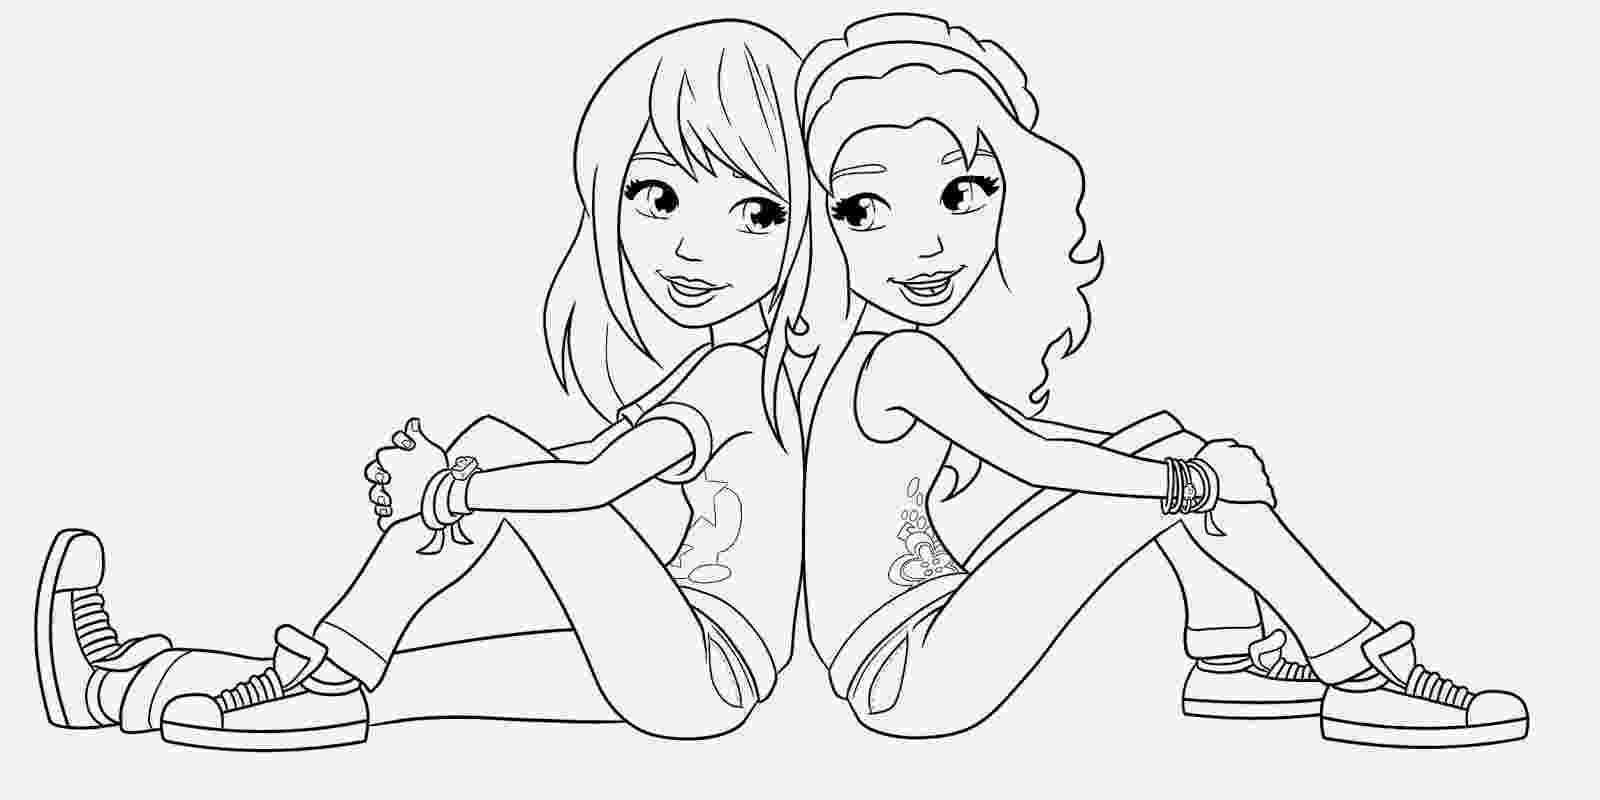 lego friends printable colouring pages lego friends coloring pages to download and print for free lego colouring friends pages printable 